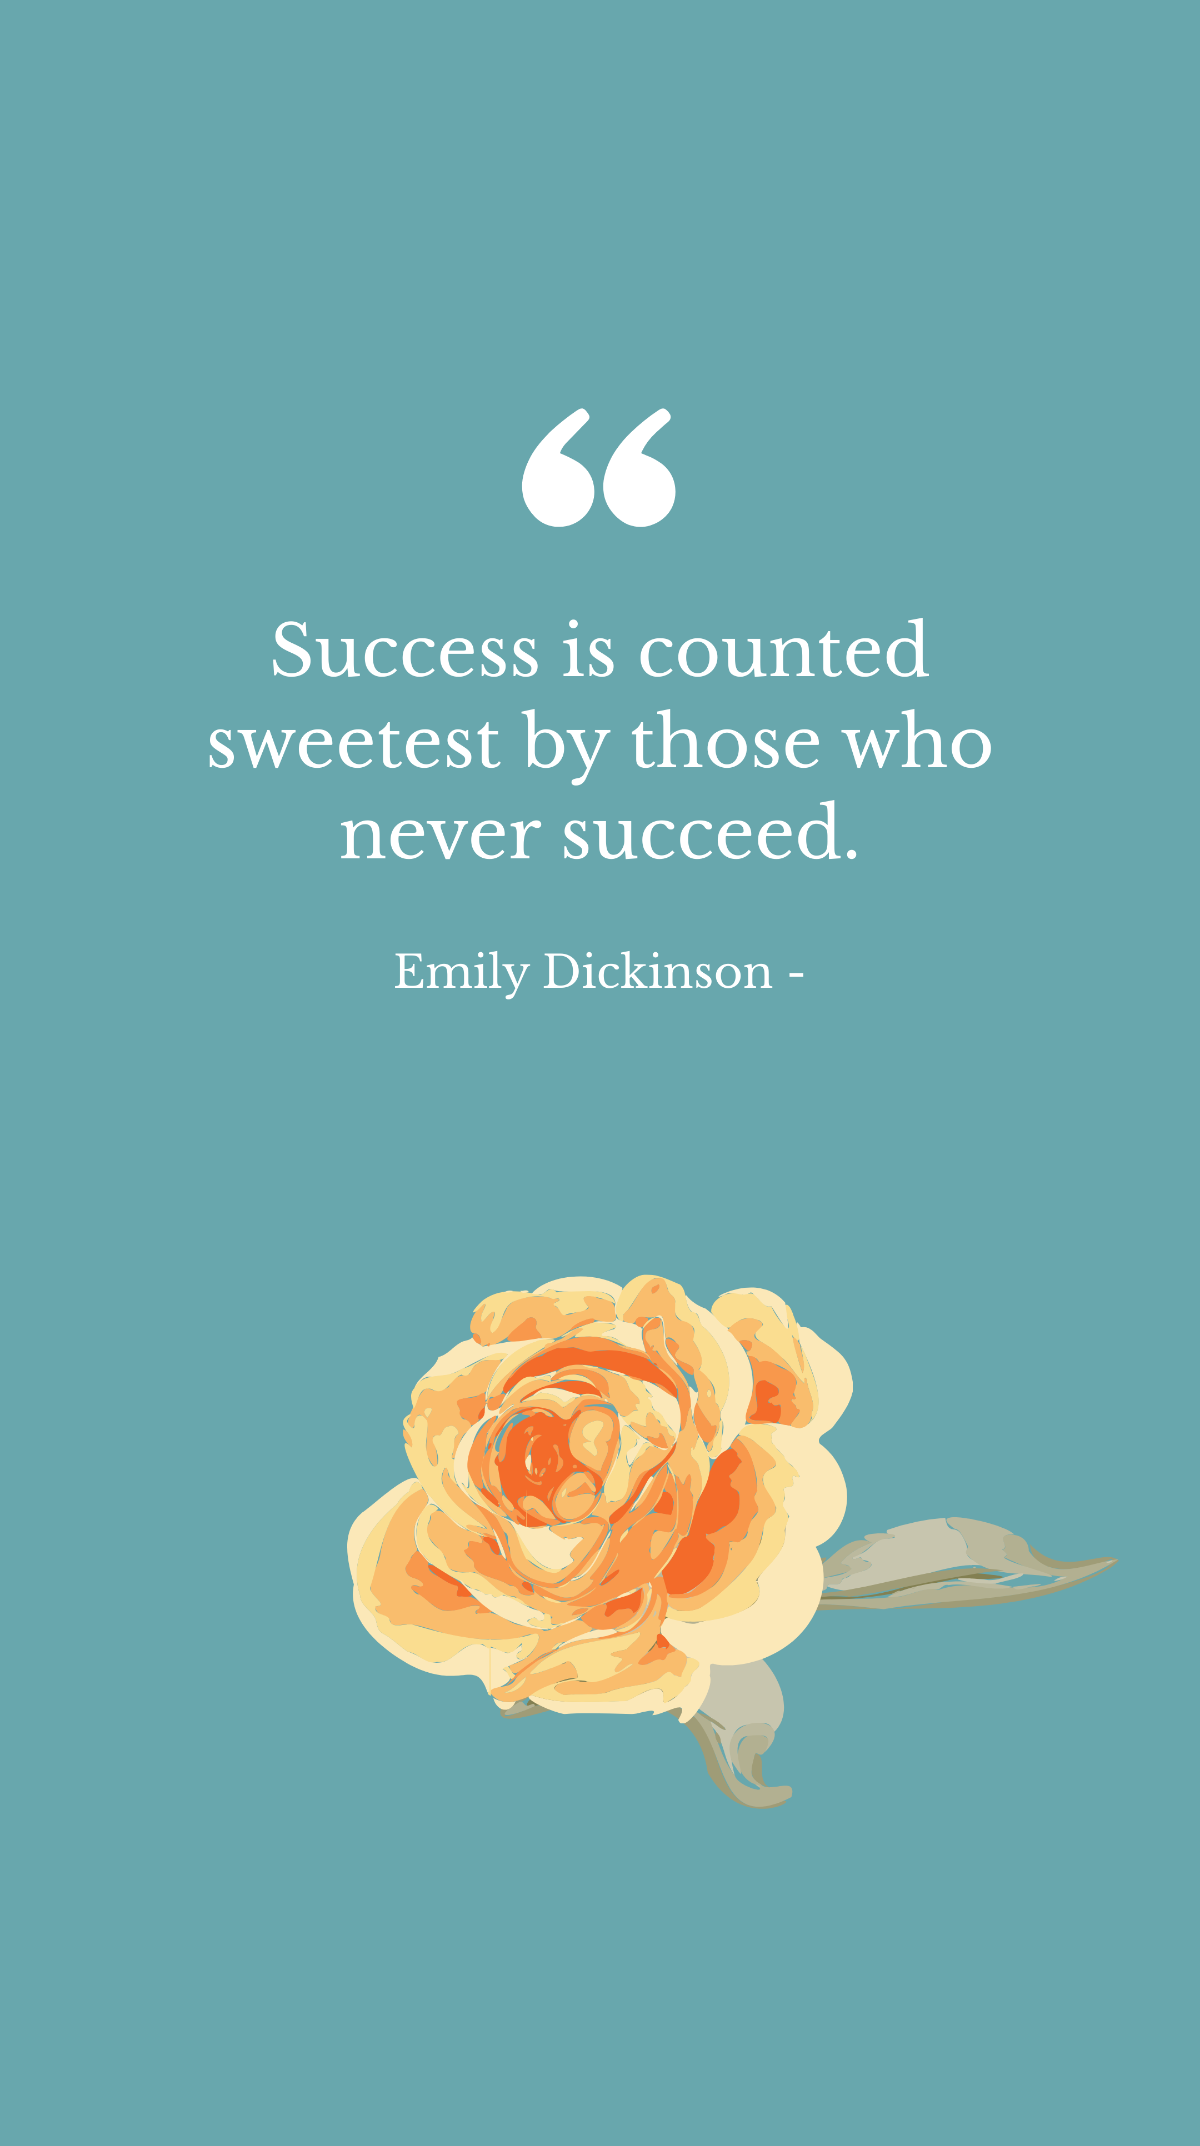 Emily Dickinson - Success is counted sweetest by those who never succeed.